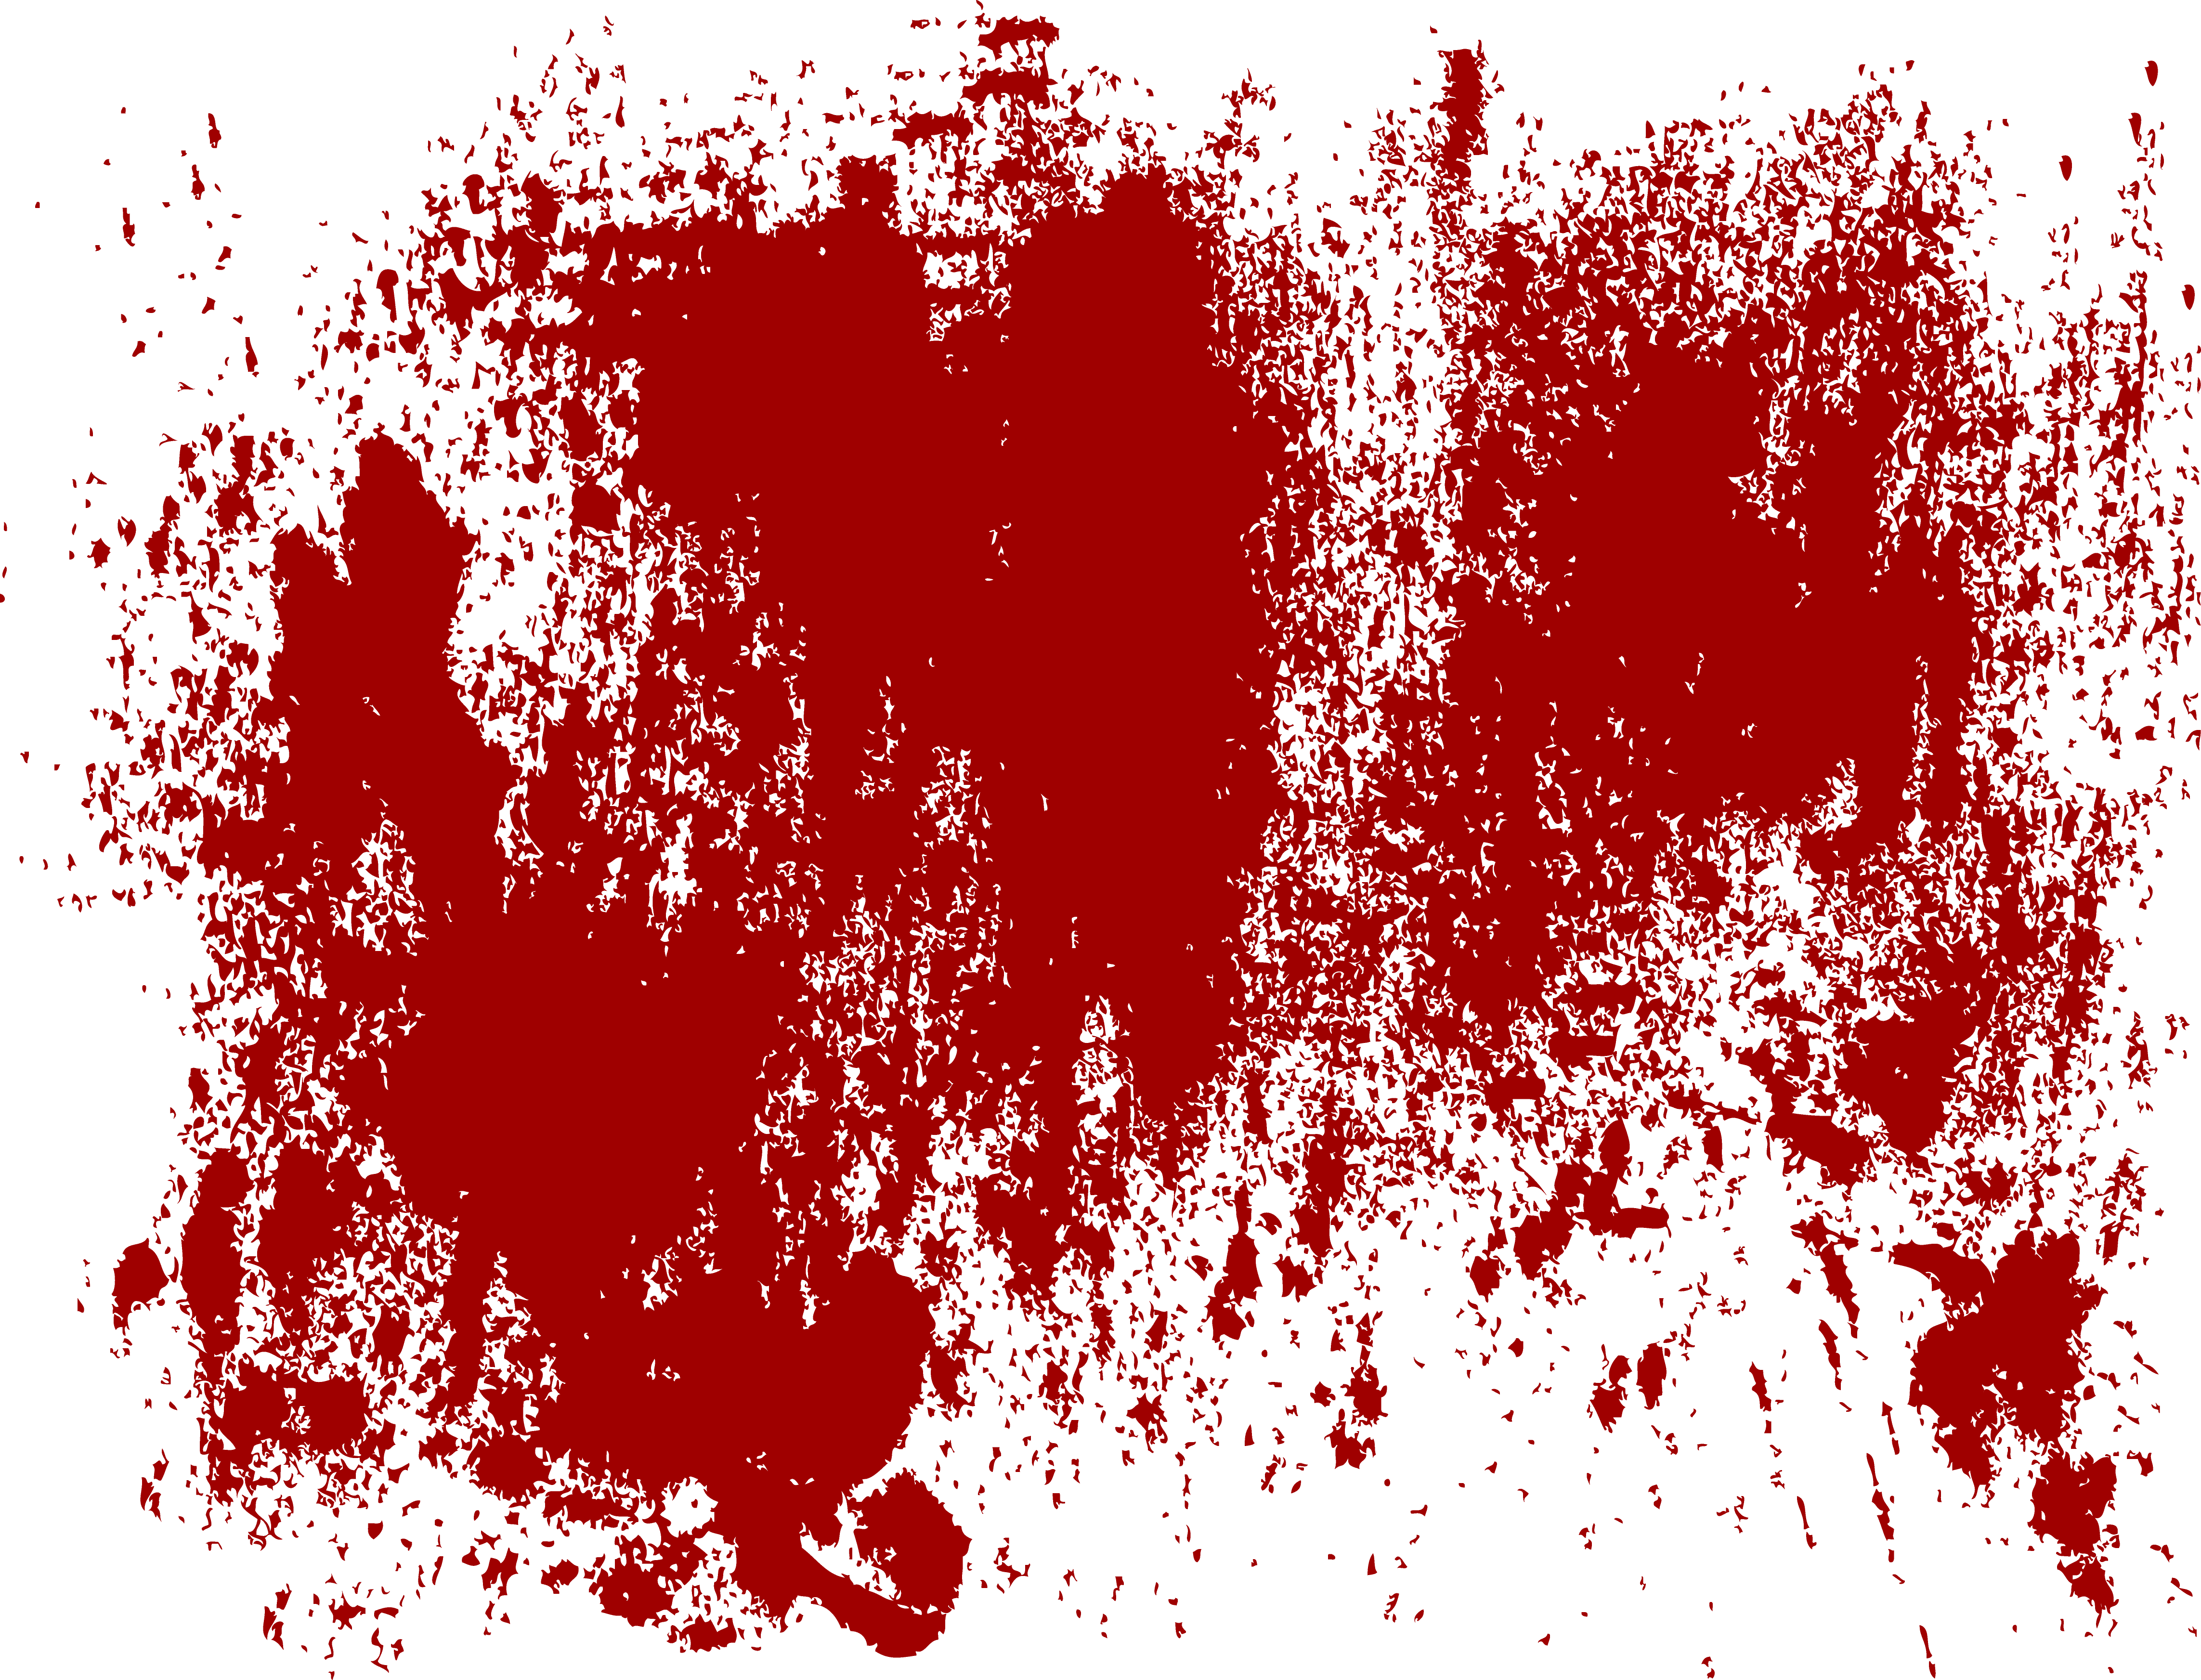 Grunge paint a large. Blood texture png